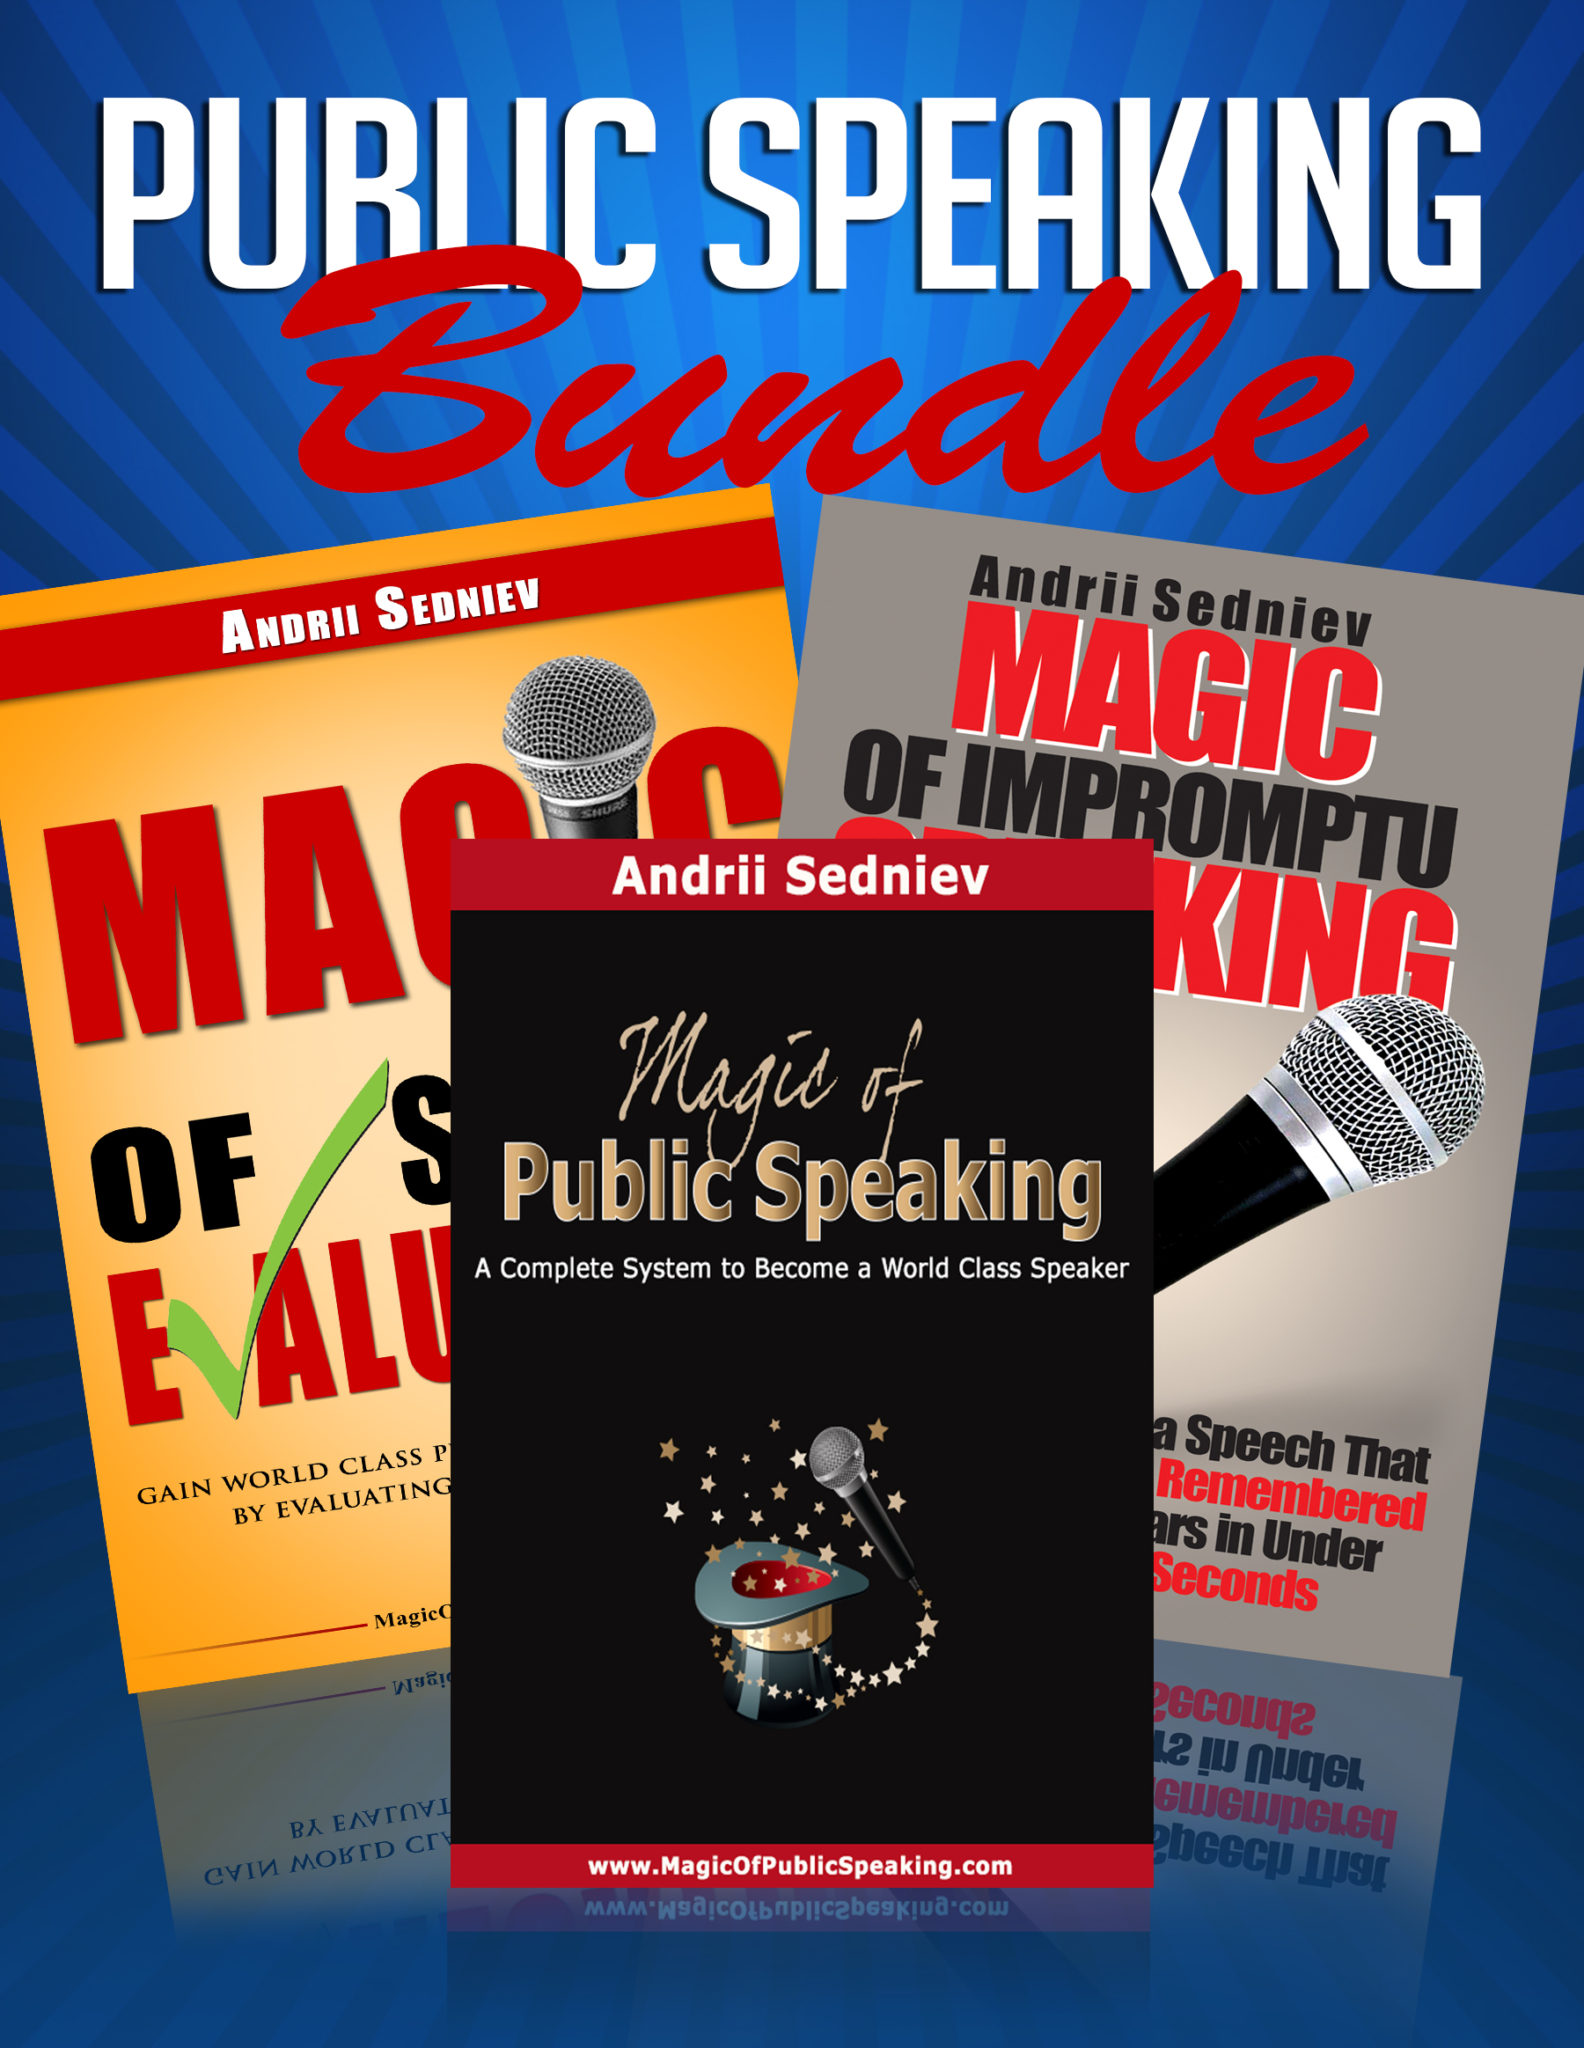 Public Speaking Bundle: An Effective System to Improve Presentation and Impromptu Speaking Skills in Record Time by Andrii Sedniev